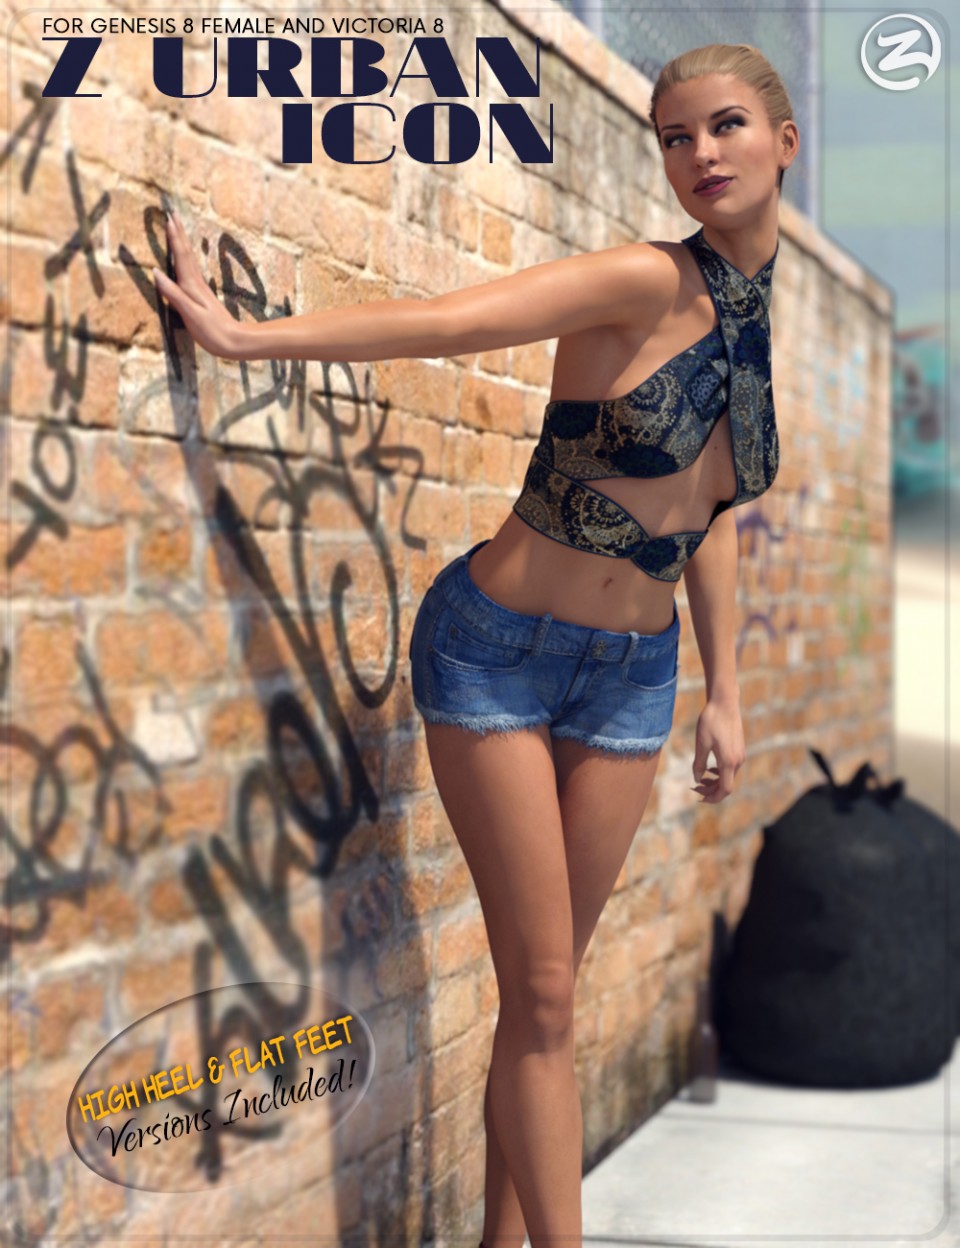 Z Urban Icon – Poses for Genesis 8 Female and Victoria 8_DAZ3D下载站